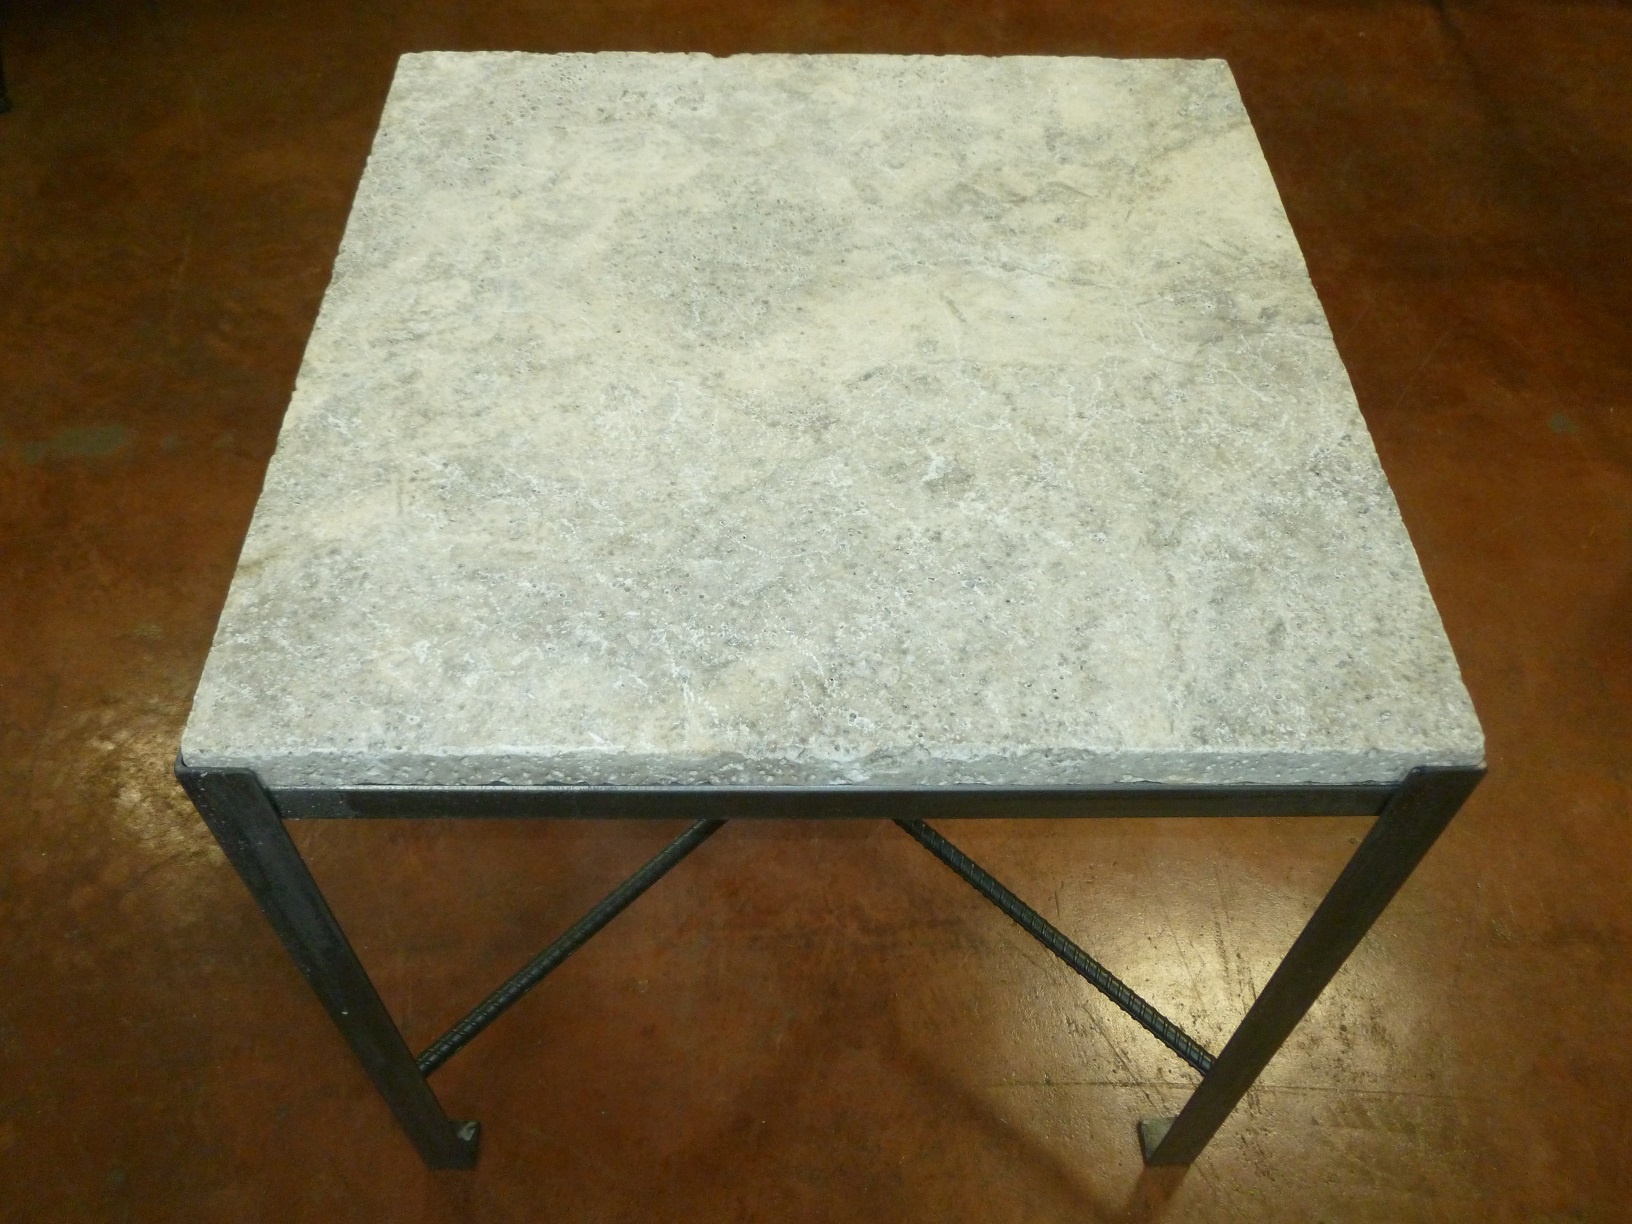 Ferro Designs LLC custom iron coffee table with a steel finish and a travertine tile top.